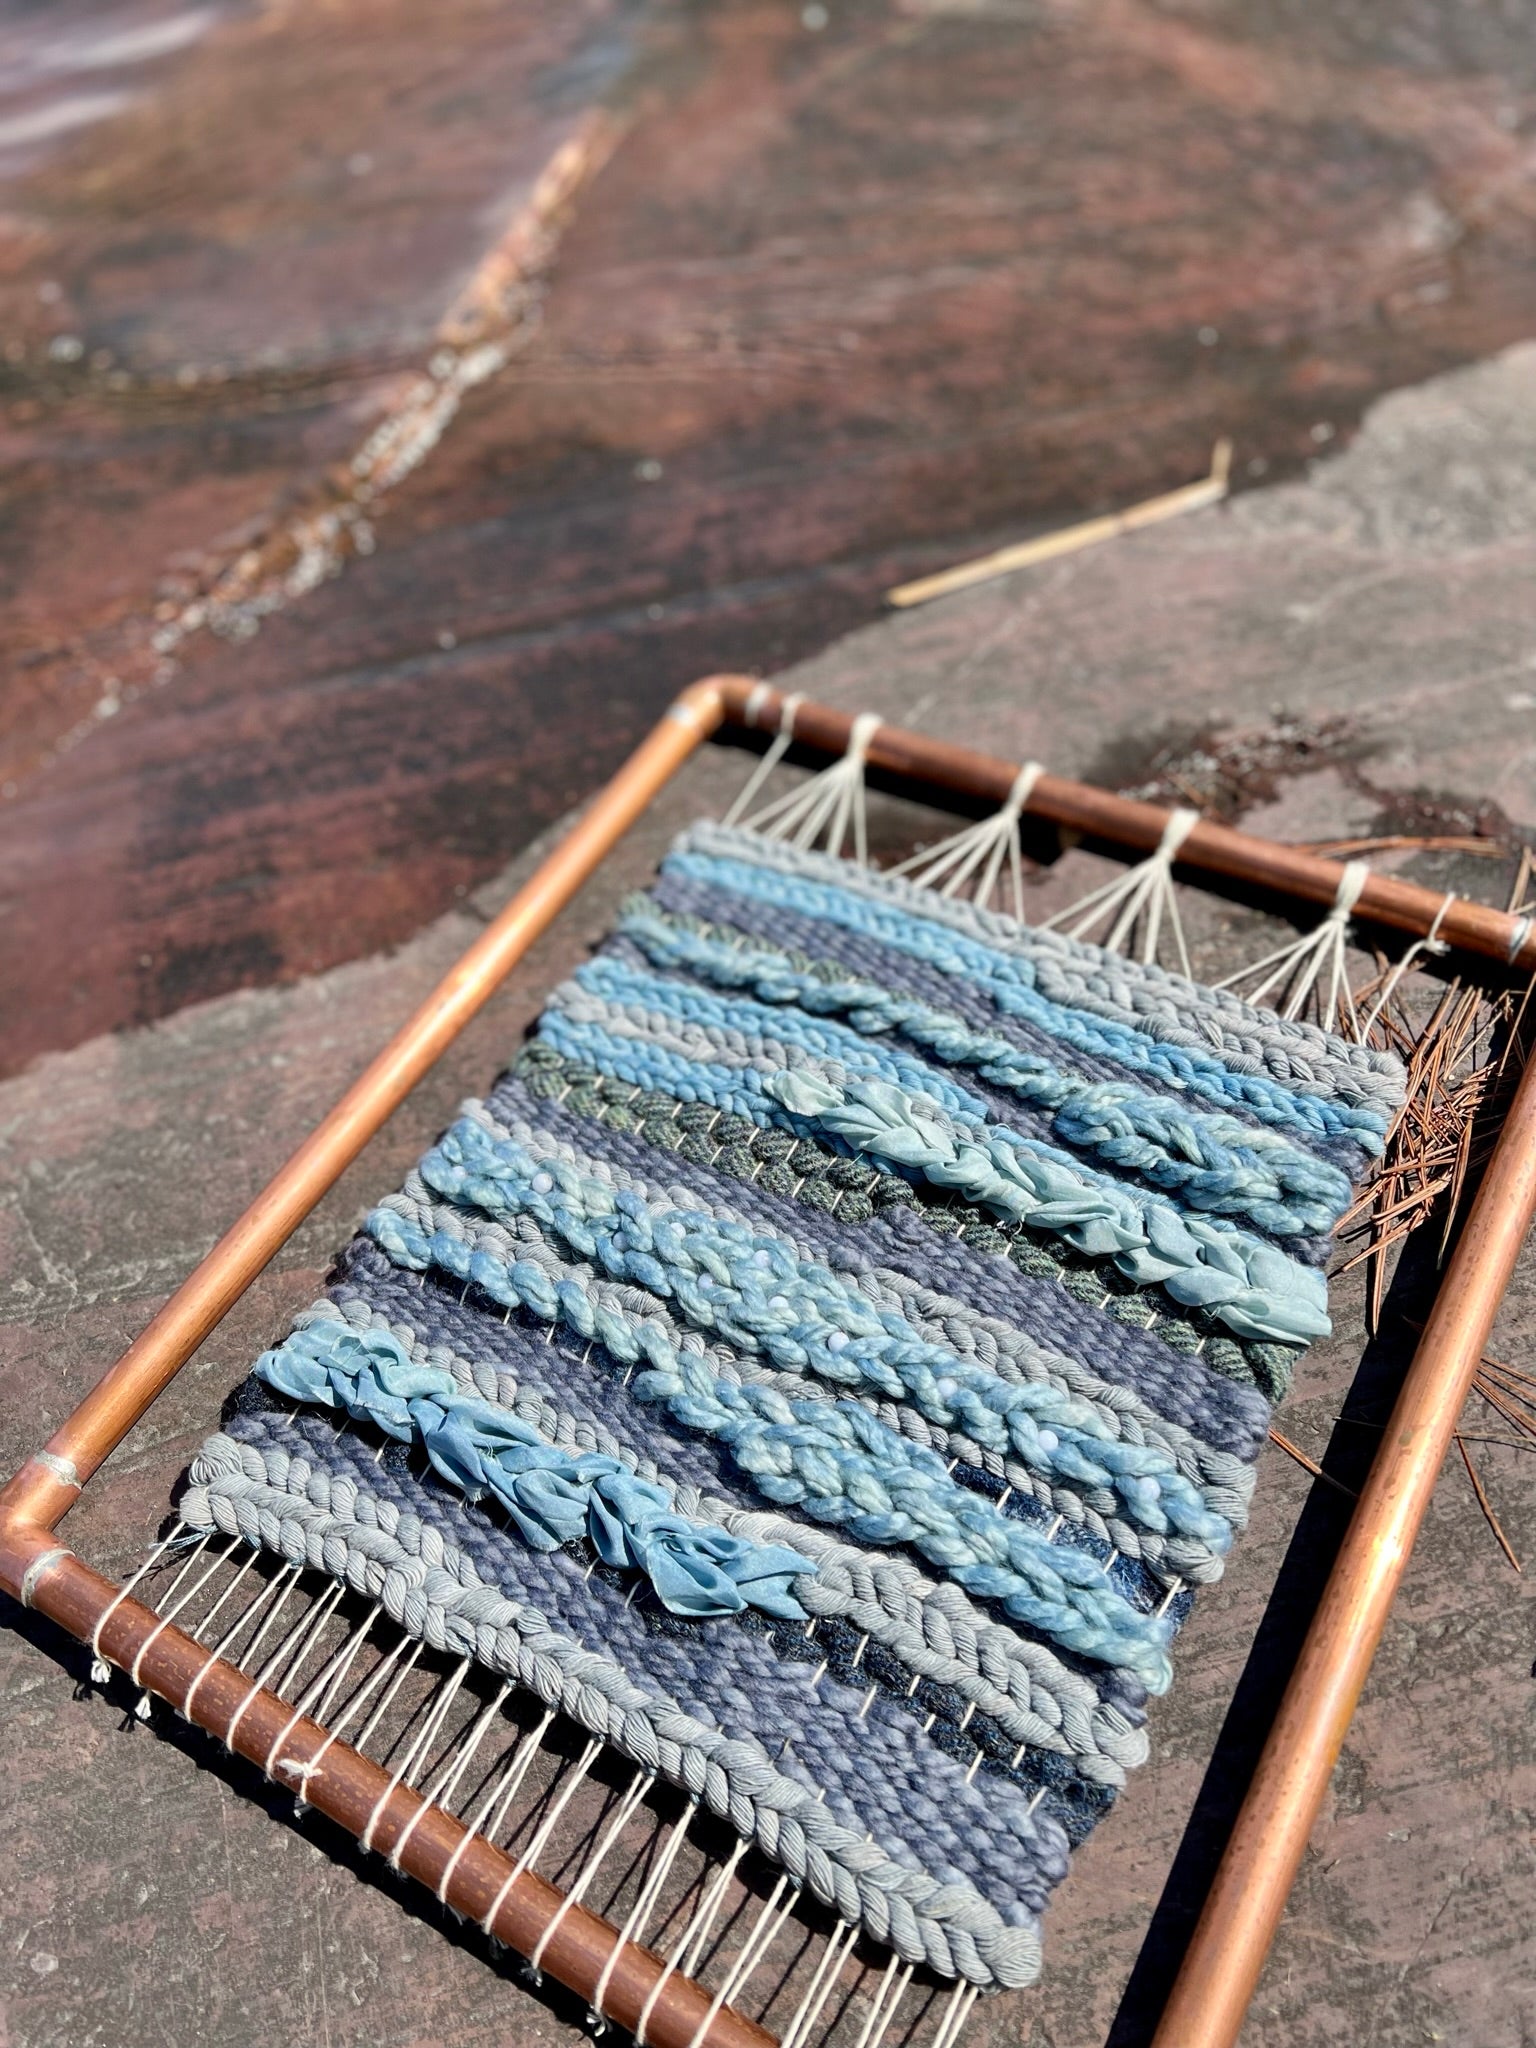 Naturally Dyed Indigo and Logwood Woven Wall Hanging with Blue Lace Agate and Harris Tweed in Custom Copper Frame